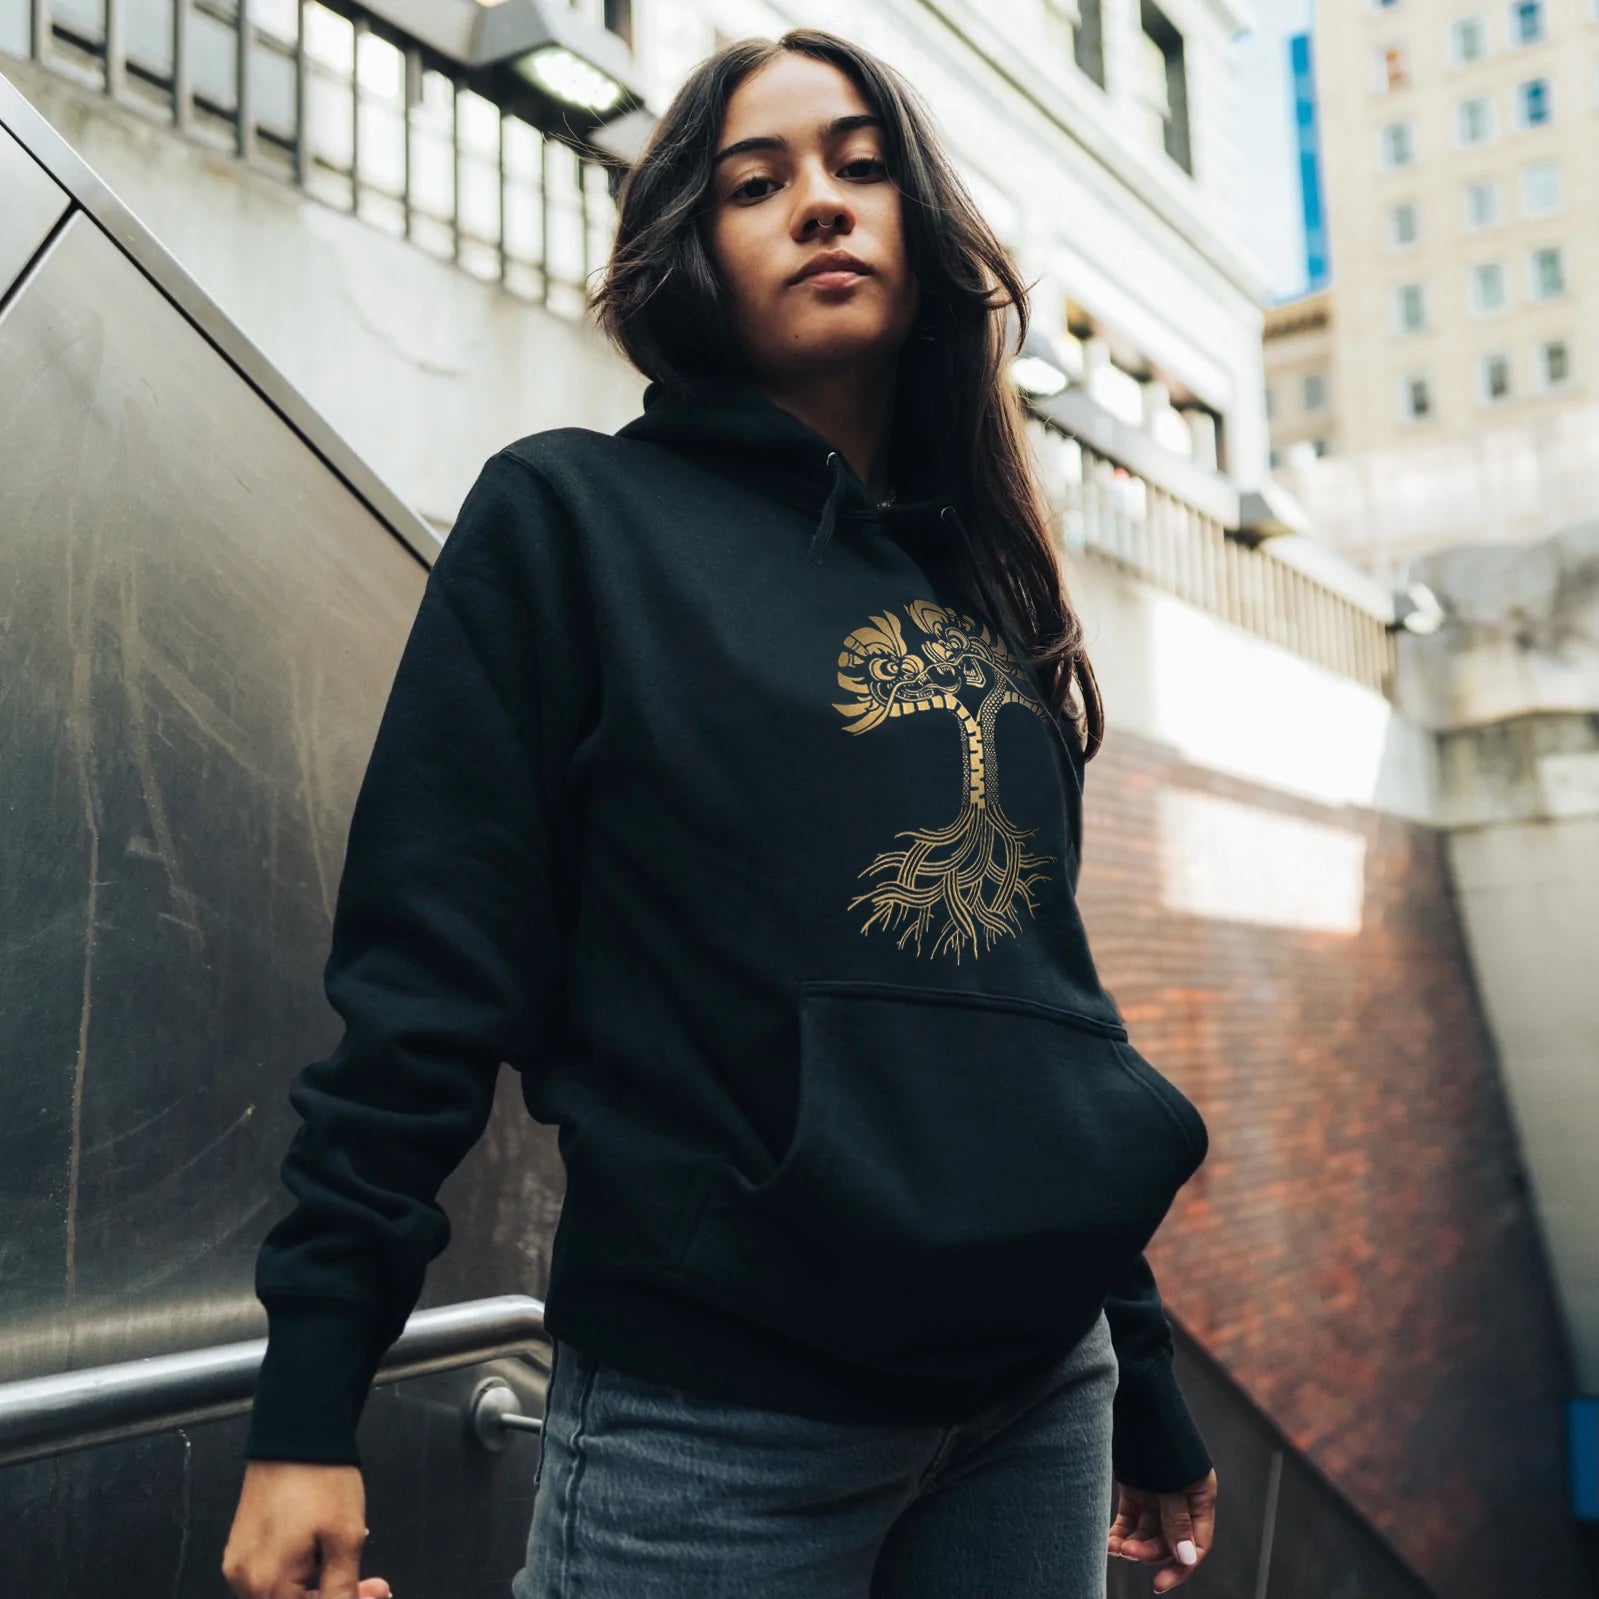 Female model outdoors in Oakland wearing black pullover hoodie with metallic gold dragon power design in the shape of the Oaklandish tree logo.